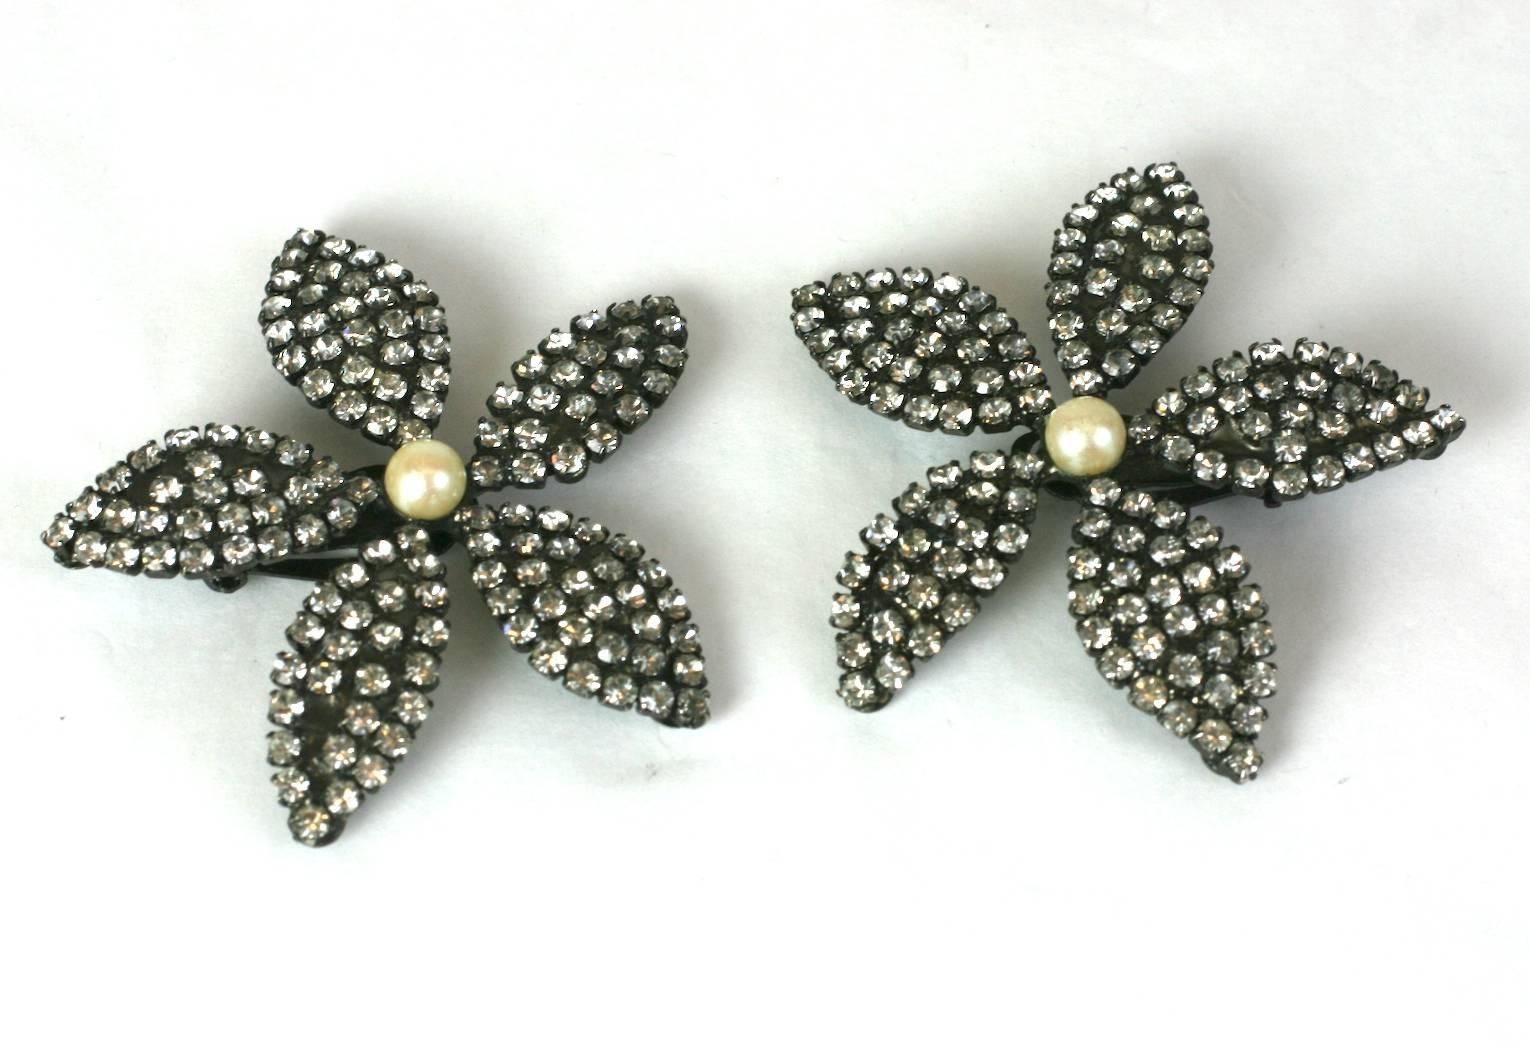 Large Butler Wilson Pave Flowerhead Earclips with clip back fittings. Crystals are set in blackened metal for contrast. 
1990's UK.  2.25"
Excellent condition. 